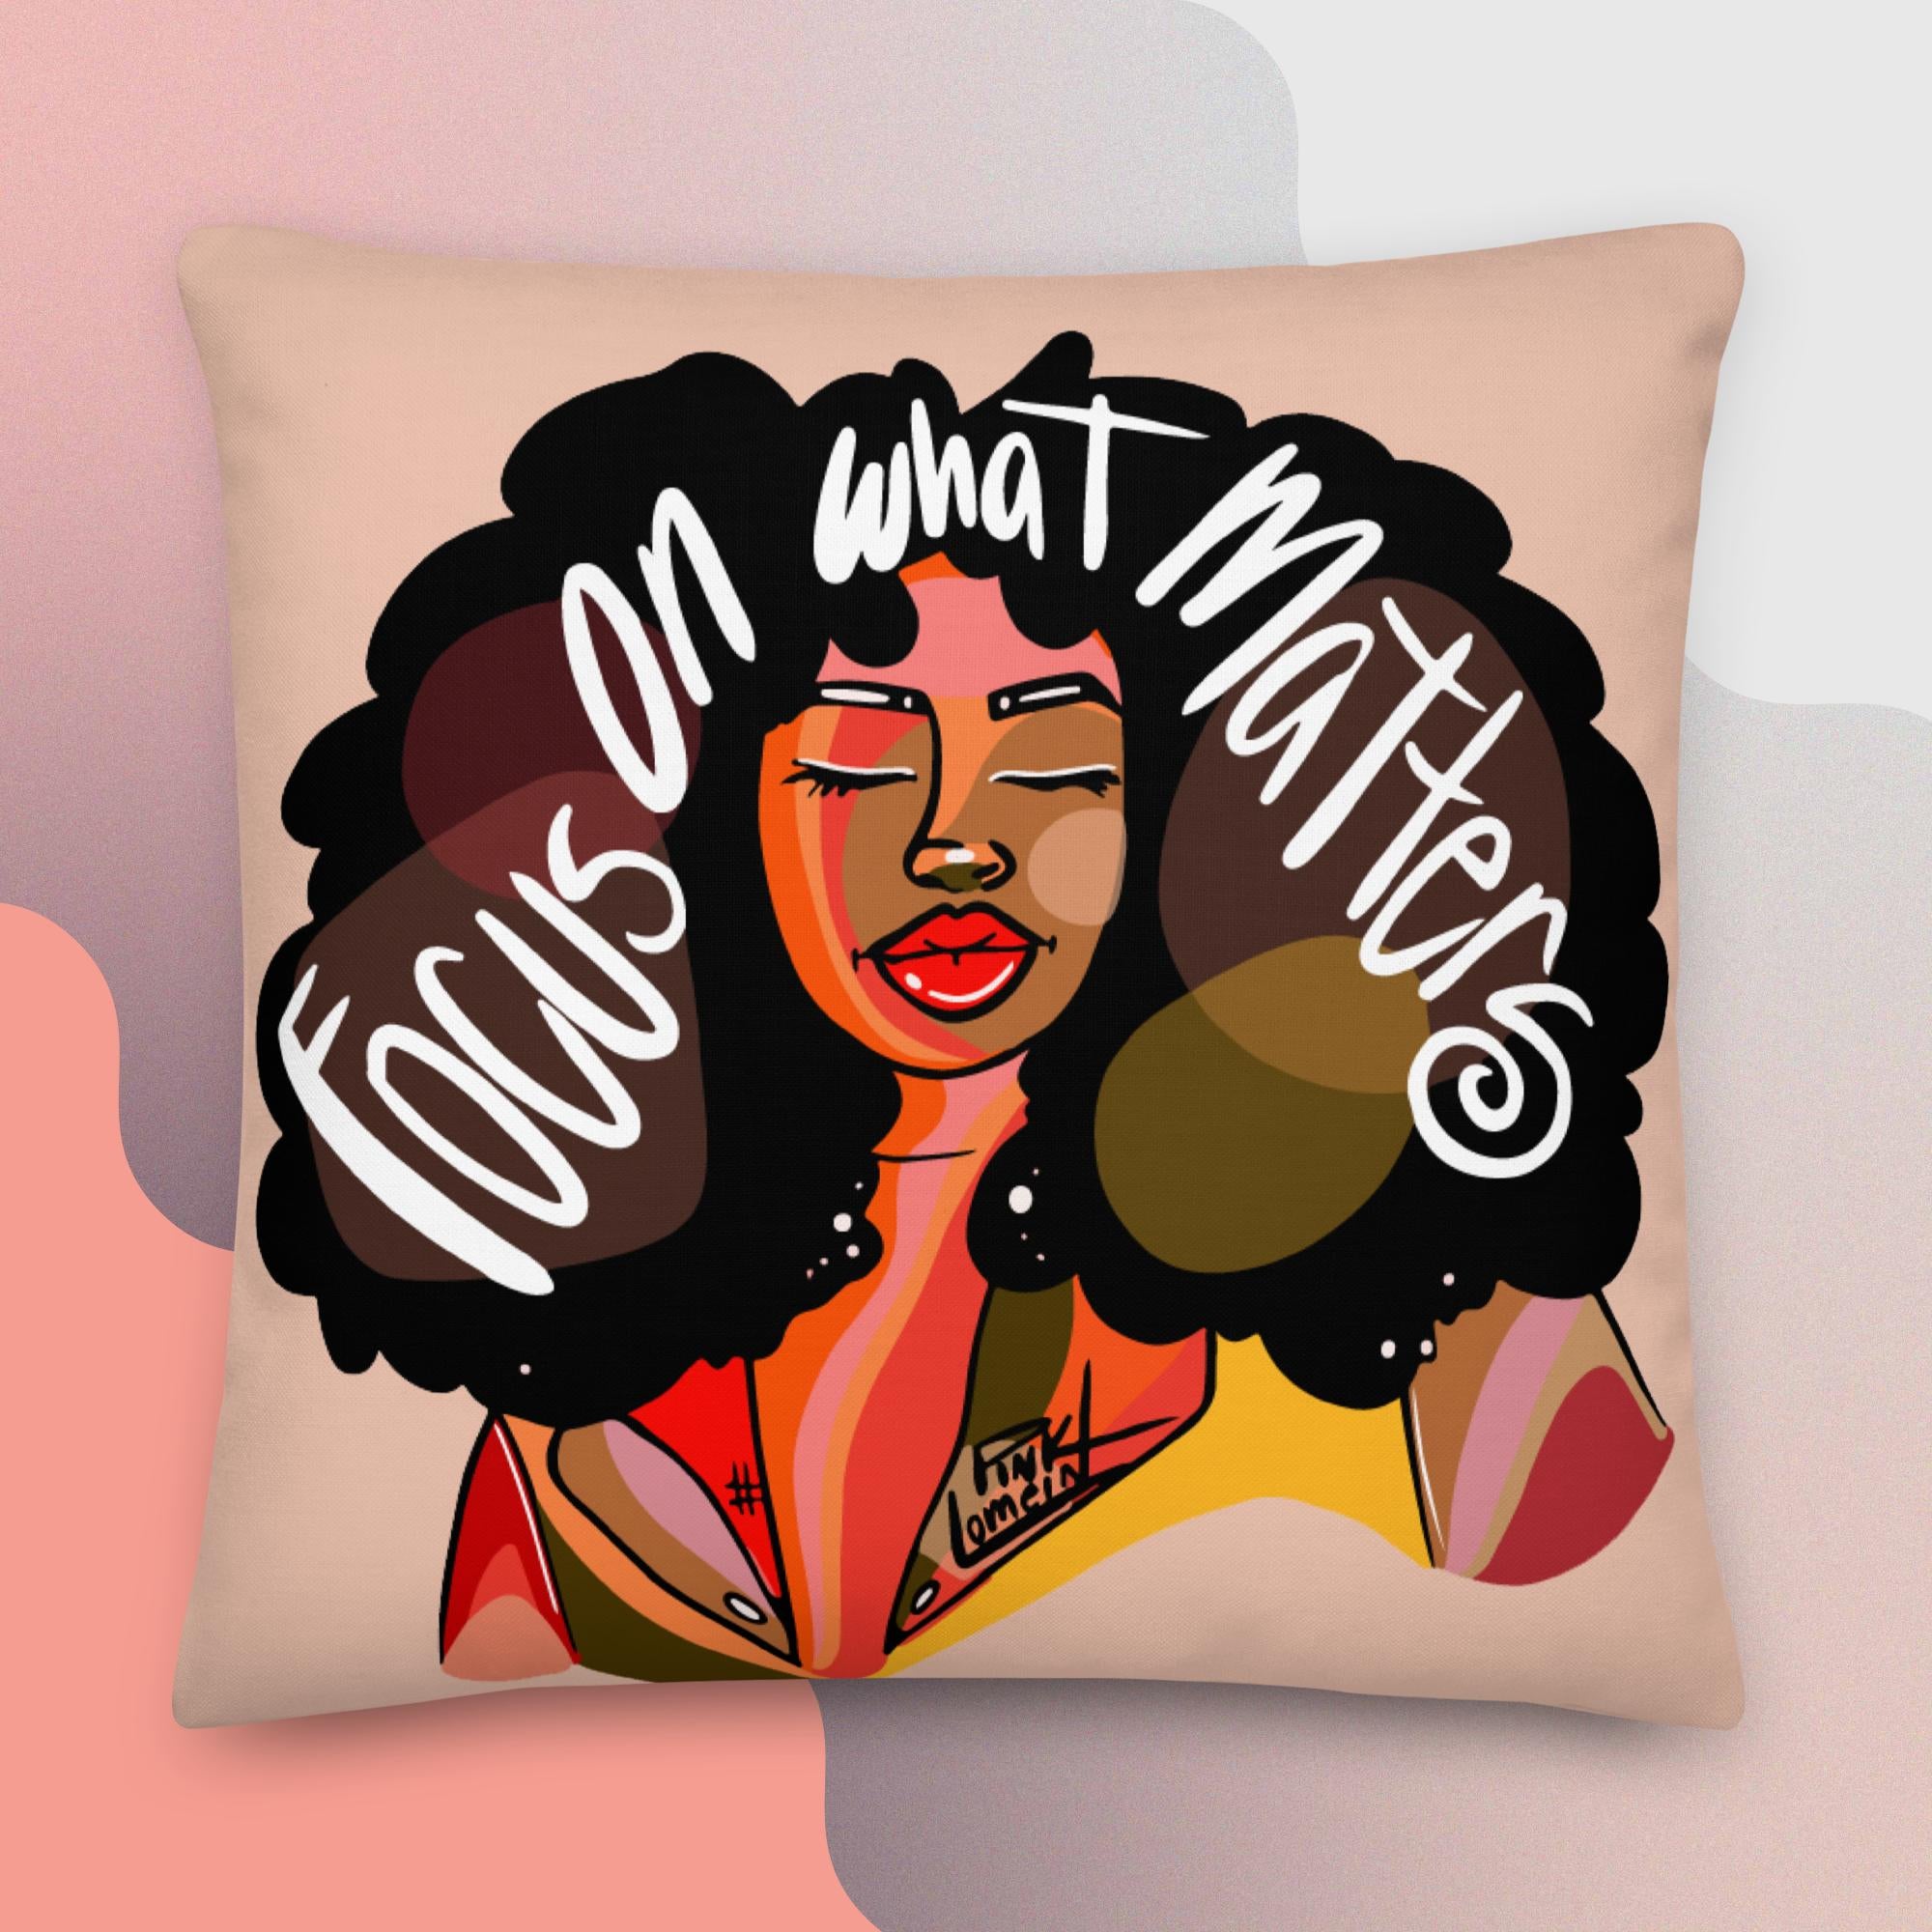 Focus on what matters Throw Pillow